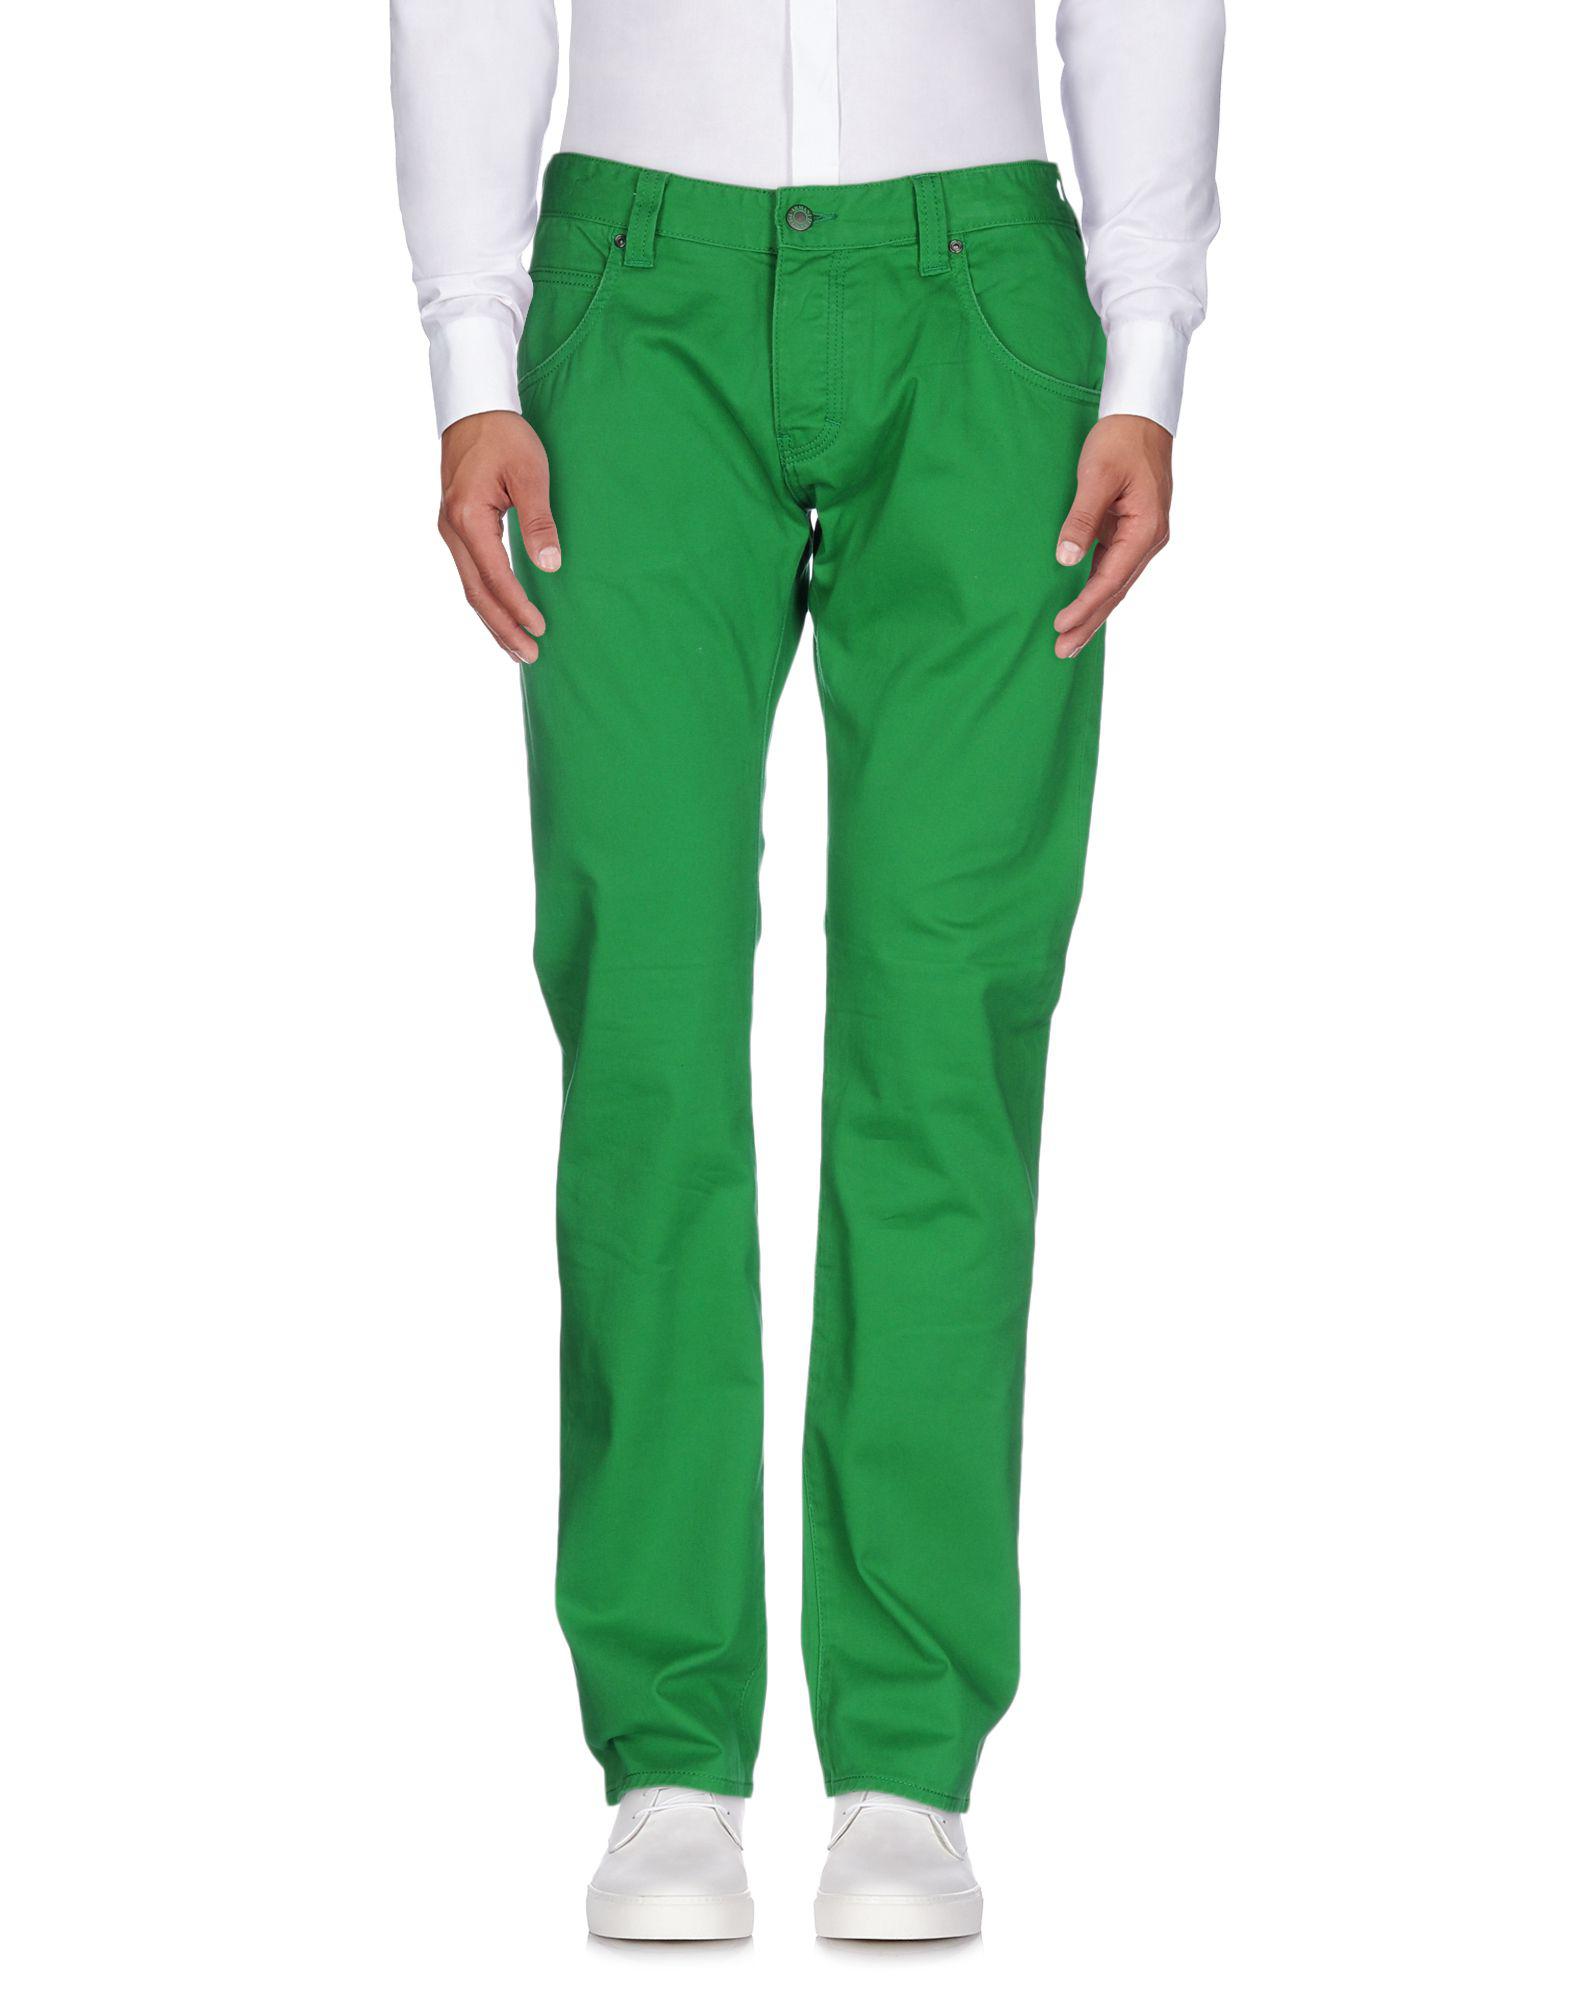 Lyst - Armani Jeans Casual Trouser in Green for Men